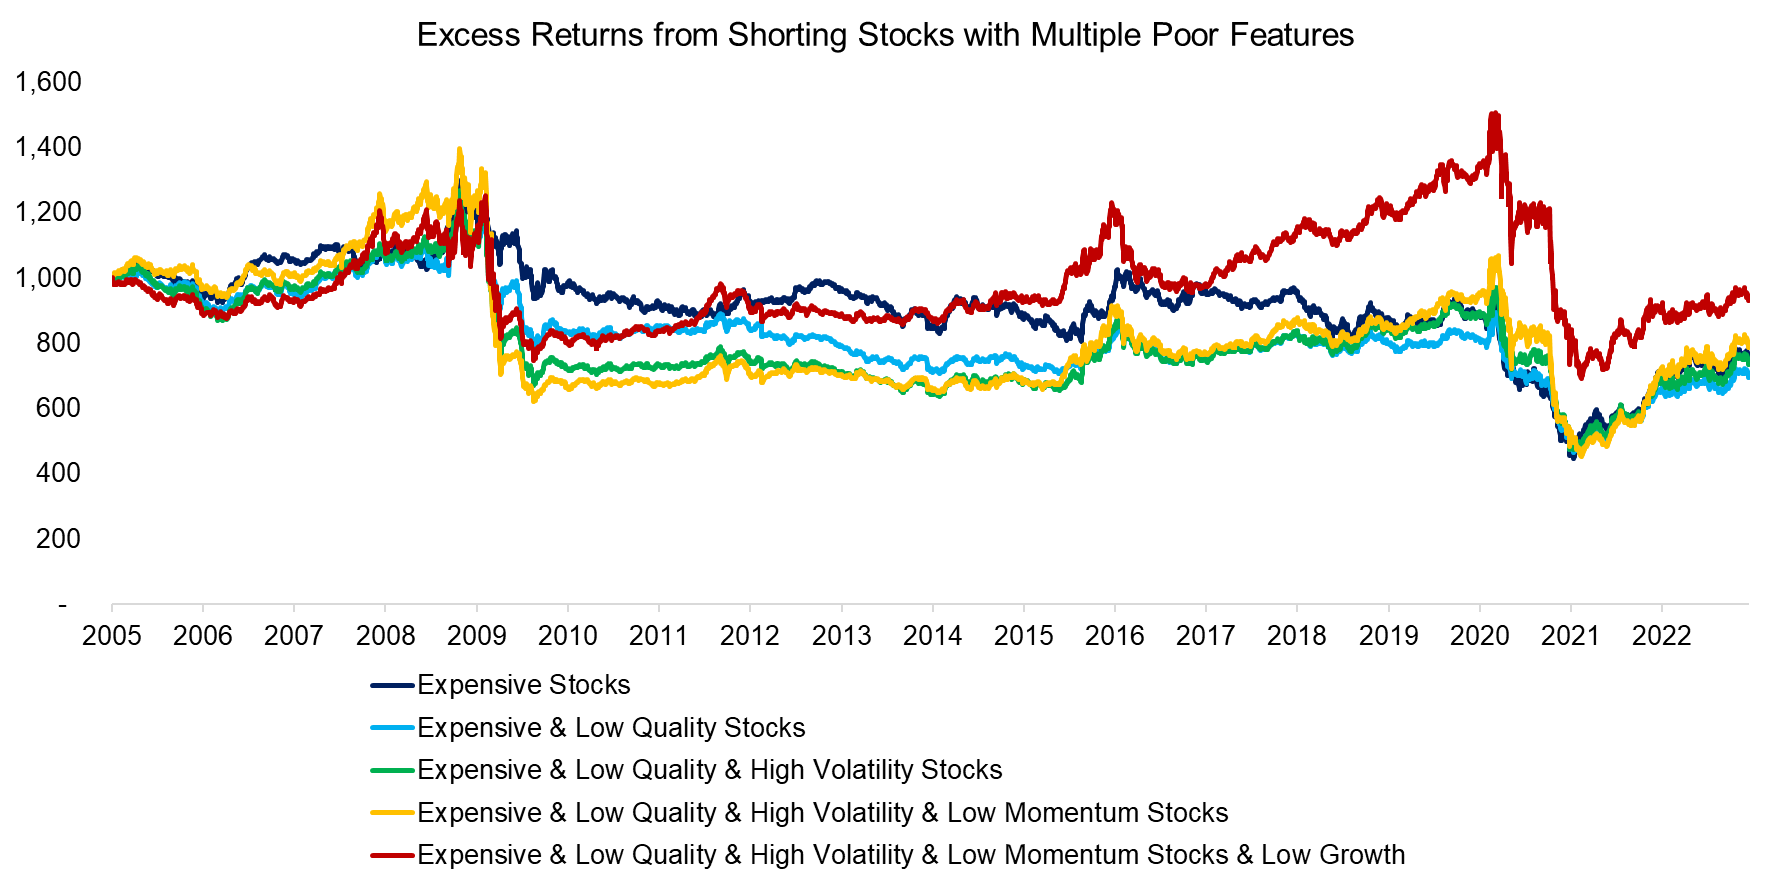 https://wps.factorresearch.com/wp-content/uploads/2023/02/Excess-Returns-from-Shorting-Stocks-with-Multiple-Poor-Featuresx.png